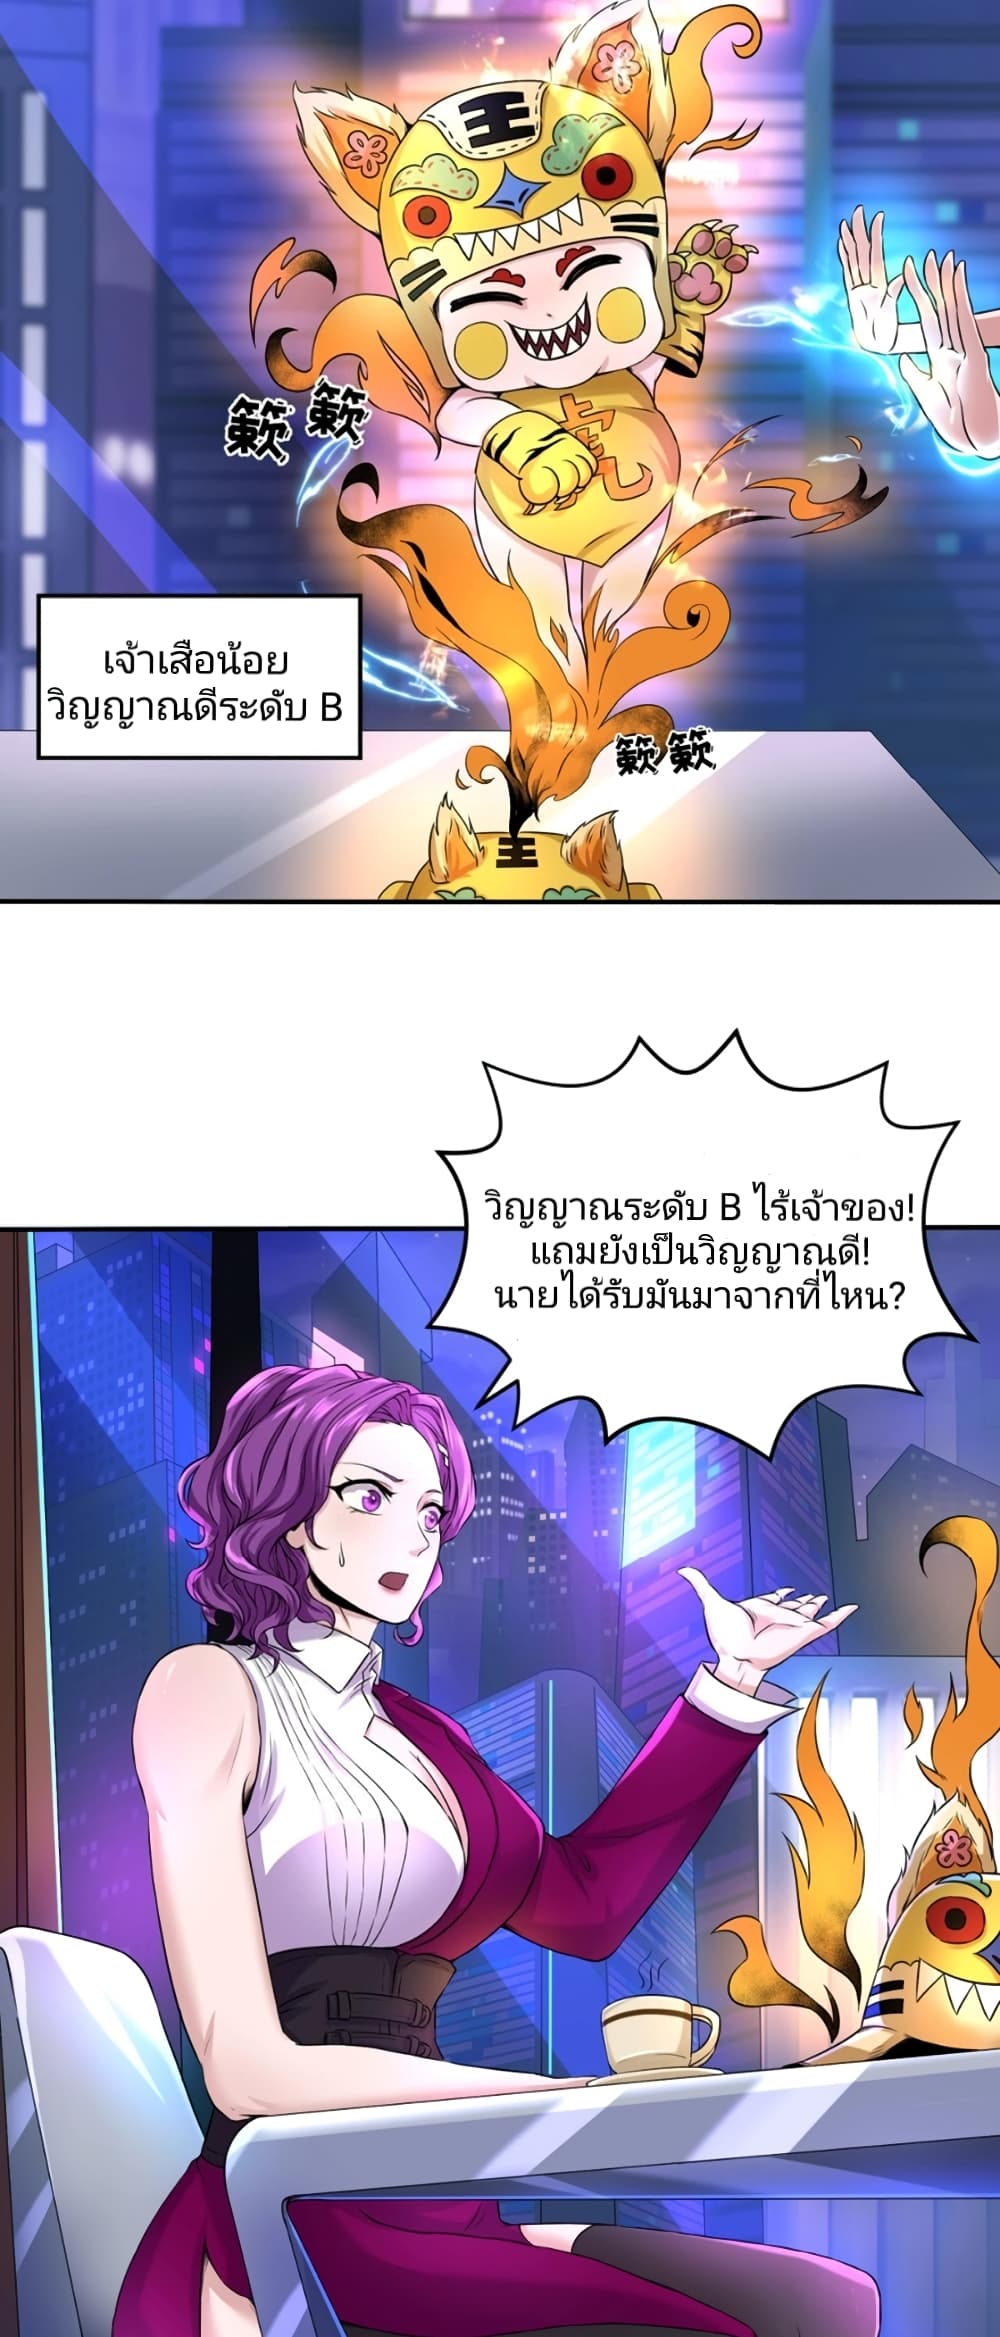 The Age of Ghost Spirits à¸à¸­à¸à¸à¸µà¹ 20 (14)